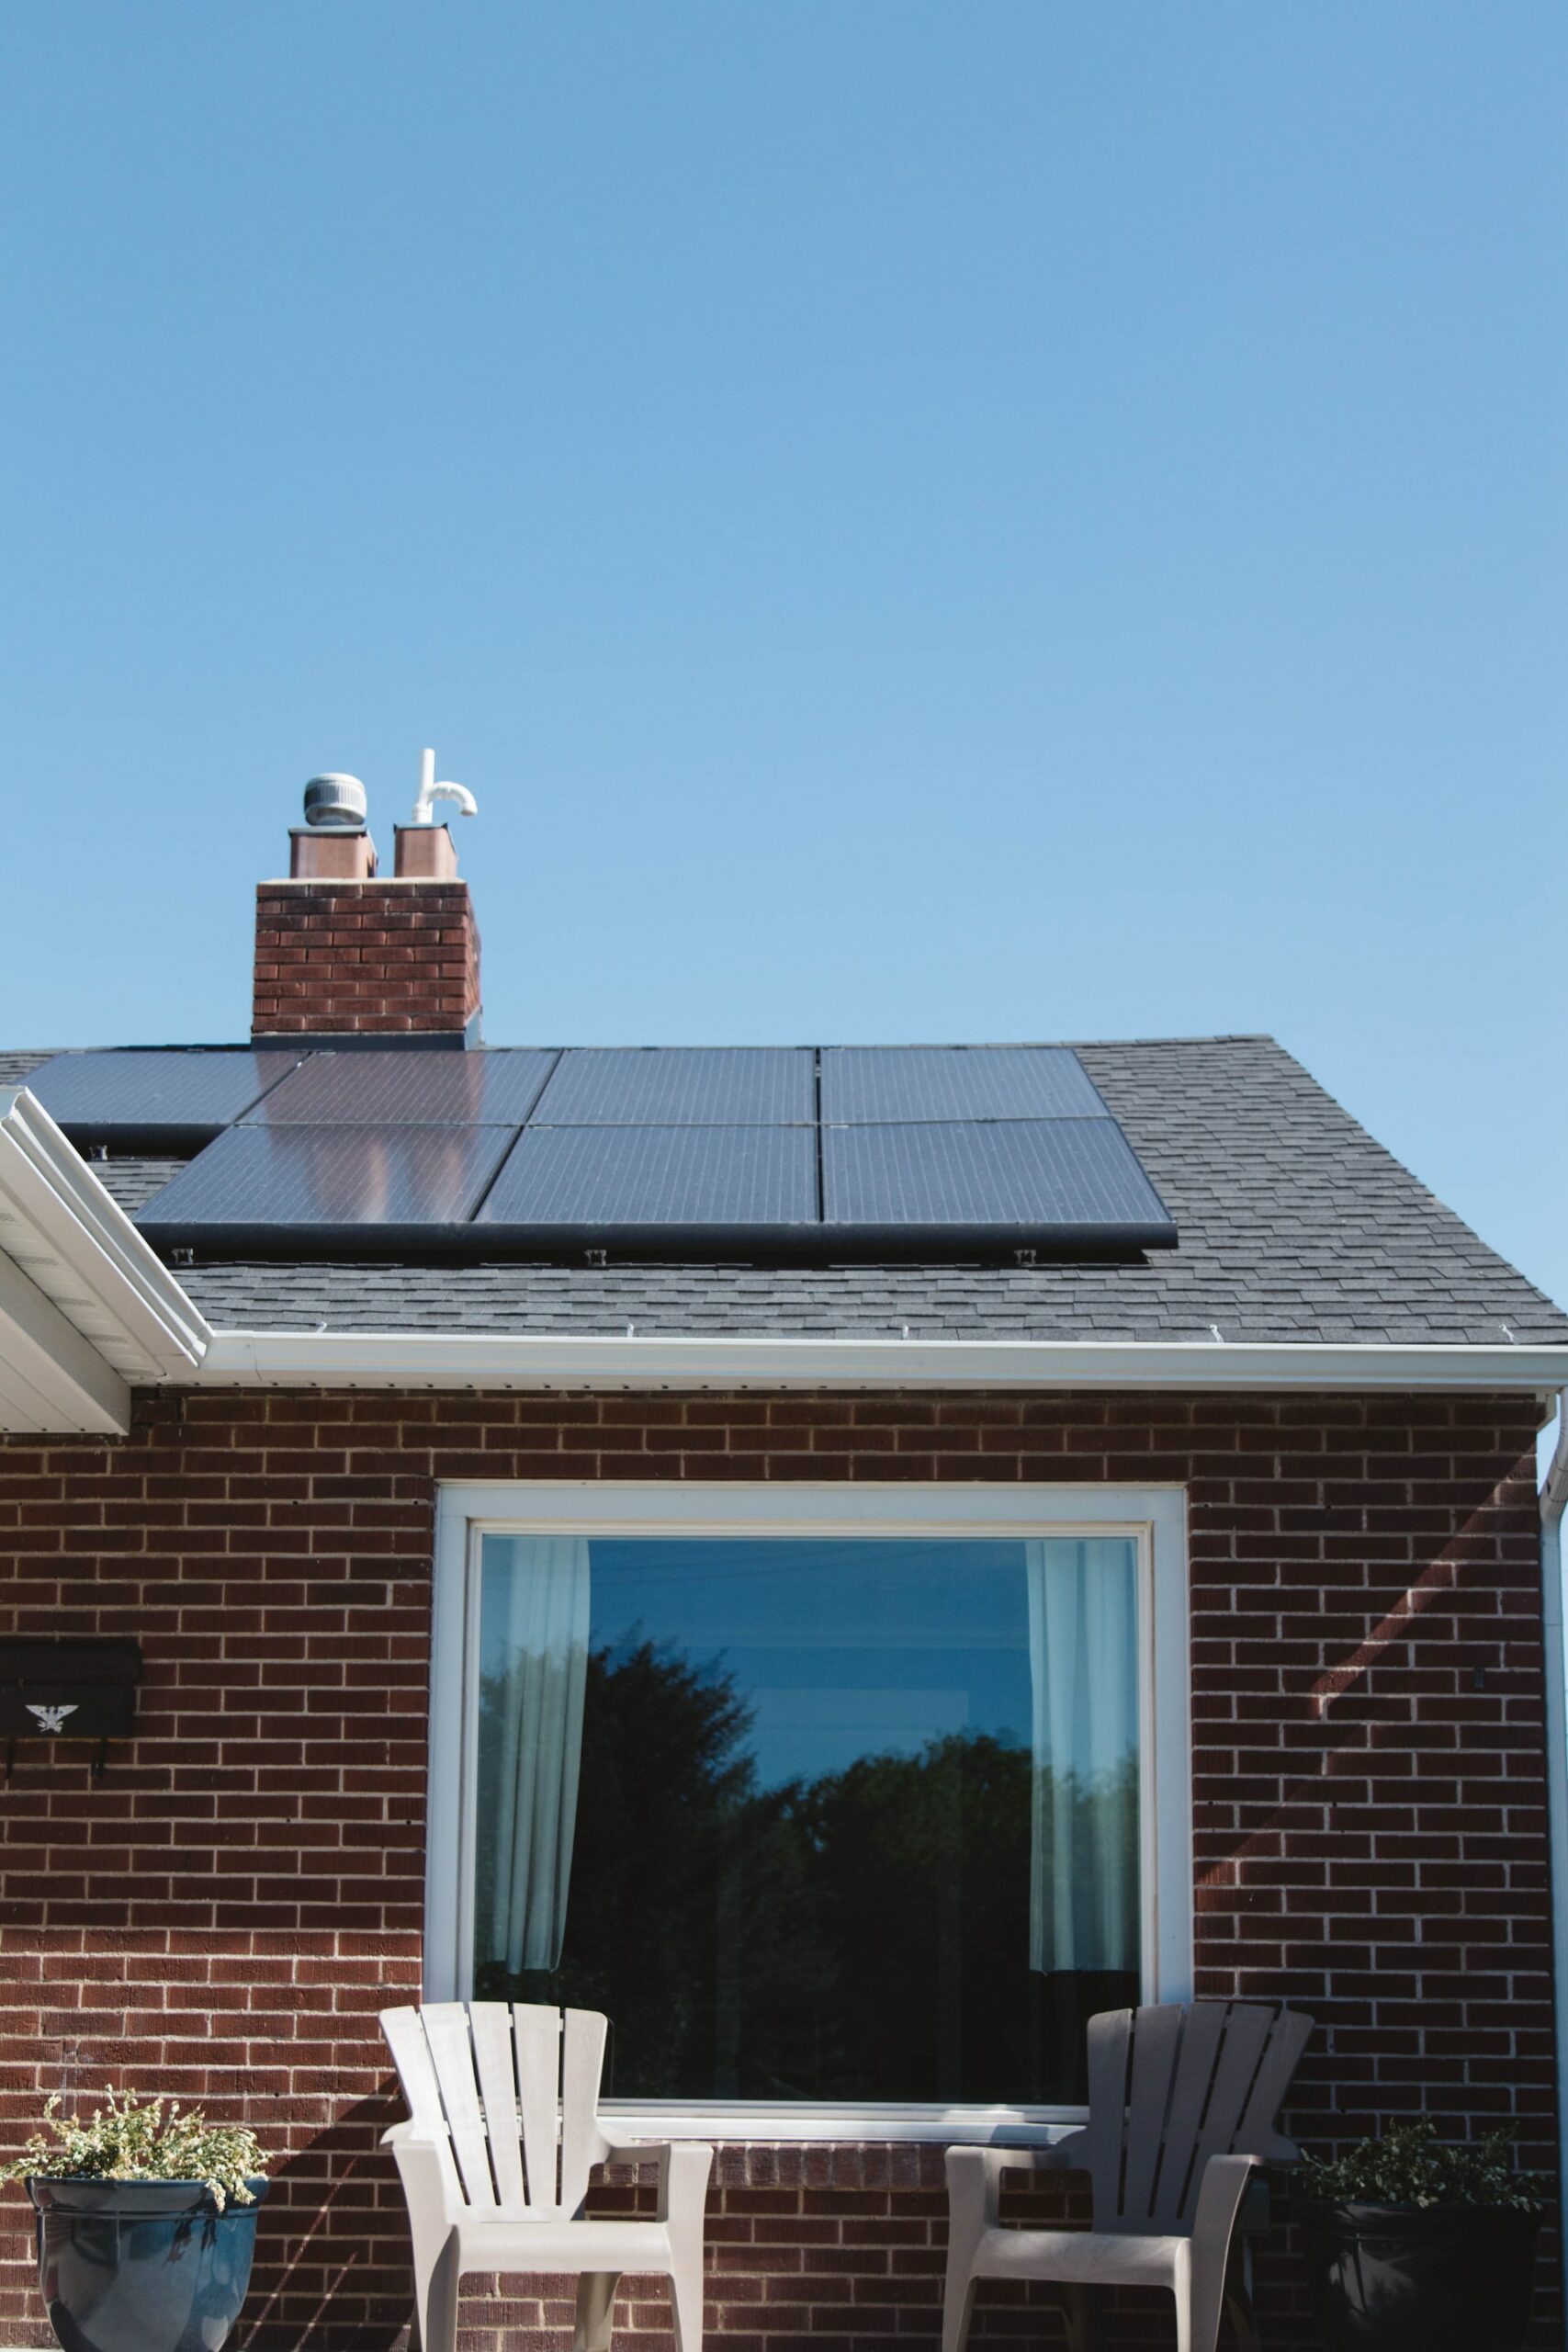 Solar PV panels on the roof of a house above a large window.